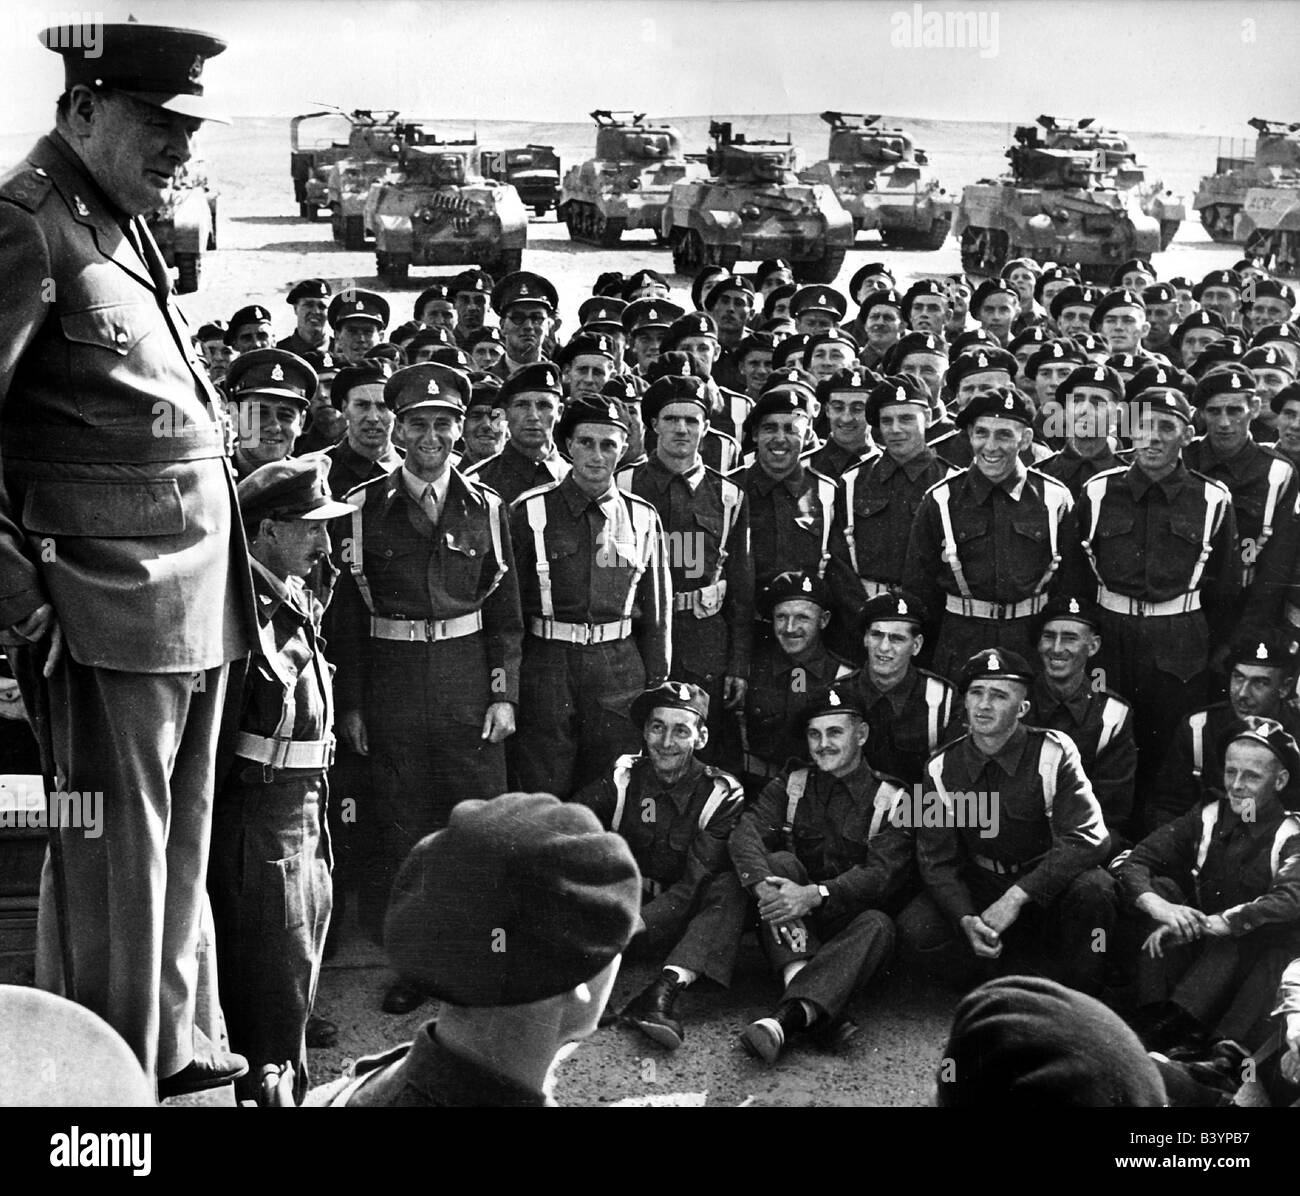 events, Second World War / WWII, North Africa, Egypt, Prime Minister Sir Winston Churchill visiting British troops, giving speech to soldiers of the 4th Queen`s Own Hussars, early 1943, in the background American tanks M5 Stuart and M4 Sherman, Desert War, tank unit, speaking, military, uniform, uniforms, Great Britain, 20th century, African Campaign, M 5, M 4, M-5, M-4, front visit, historic, historical, 1940s, people, Stock Photo